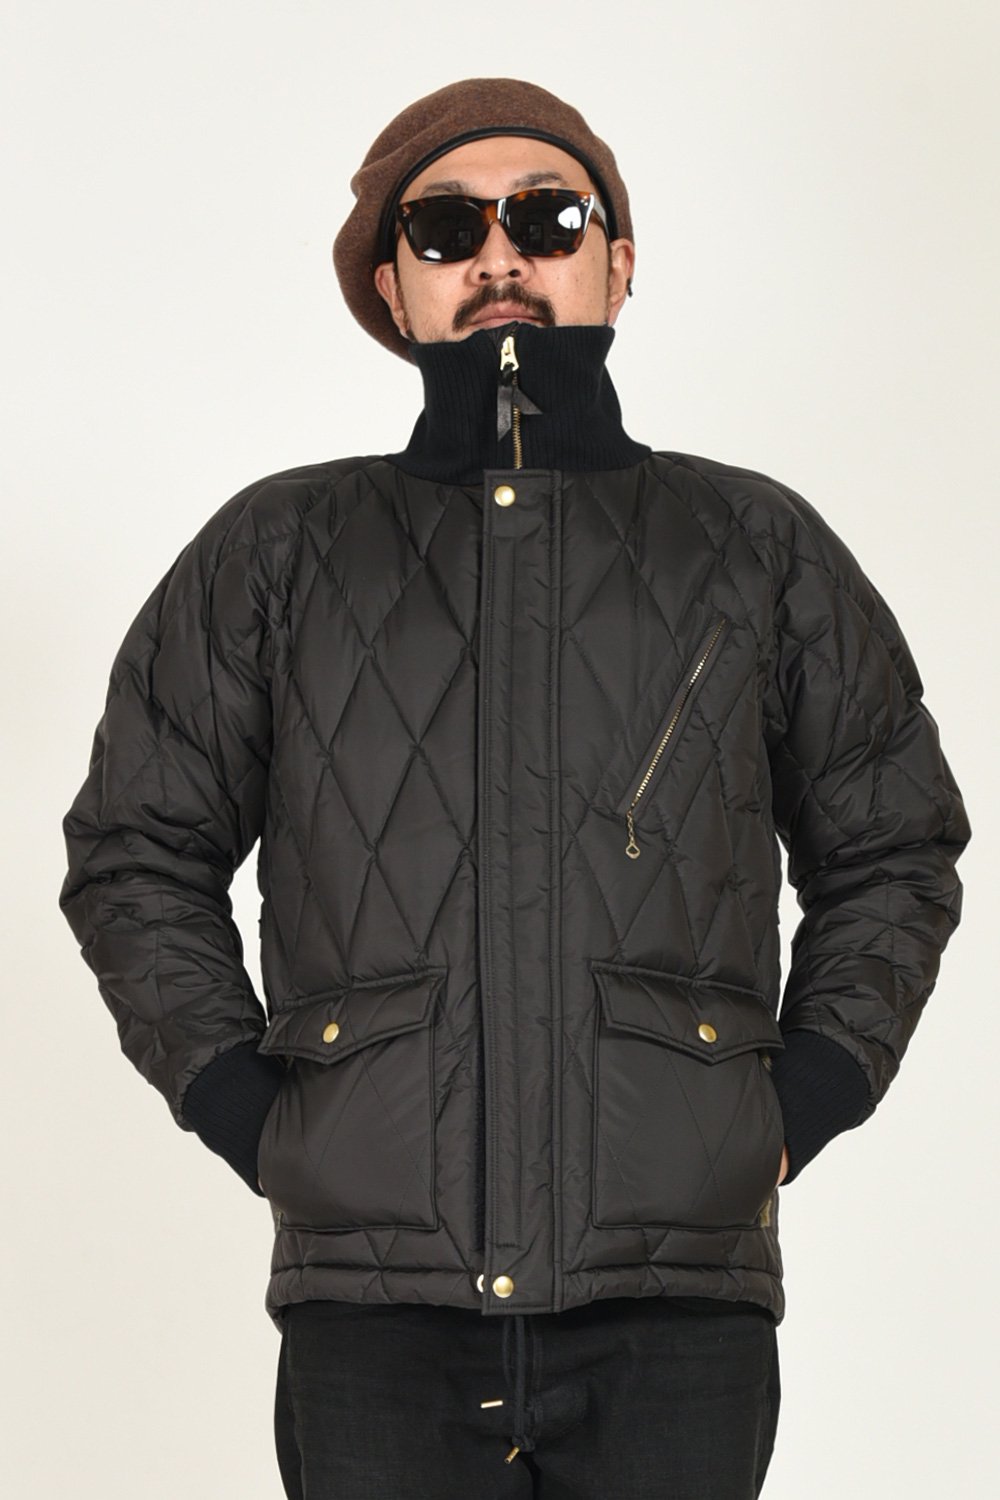 WESTRIDE(ウエストライド) レーシングダウンジャケット ALL NEW RACING DOWN JKT2 RELAX FIT with  WIND GUARD HJW-02RF ハーレムストア公式通販サイト